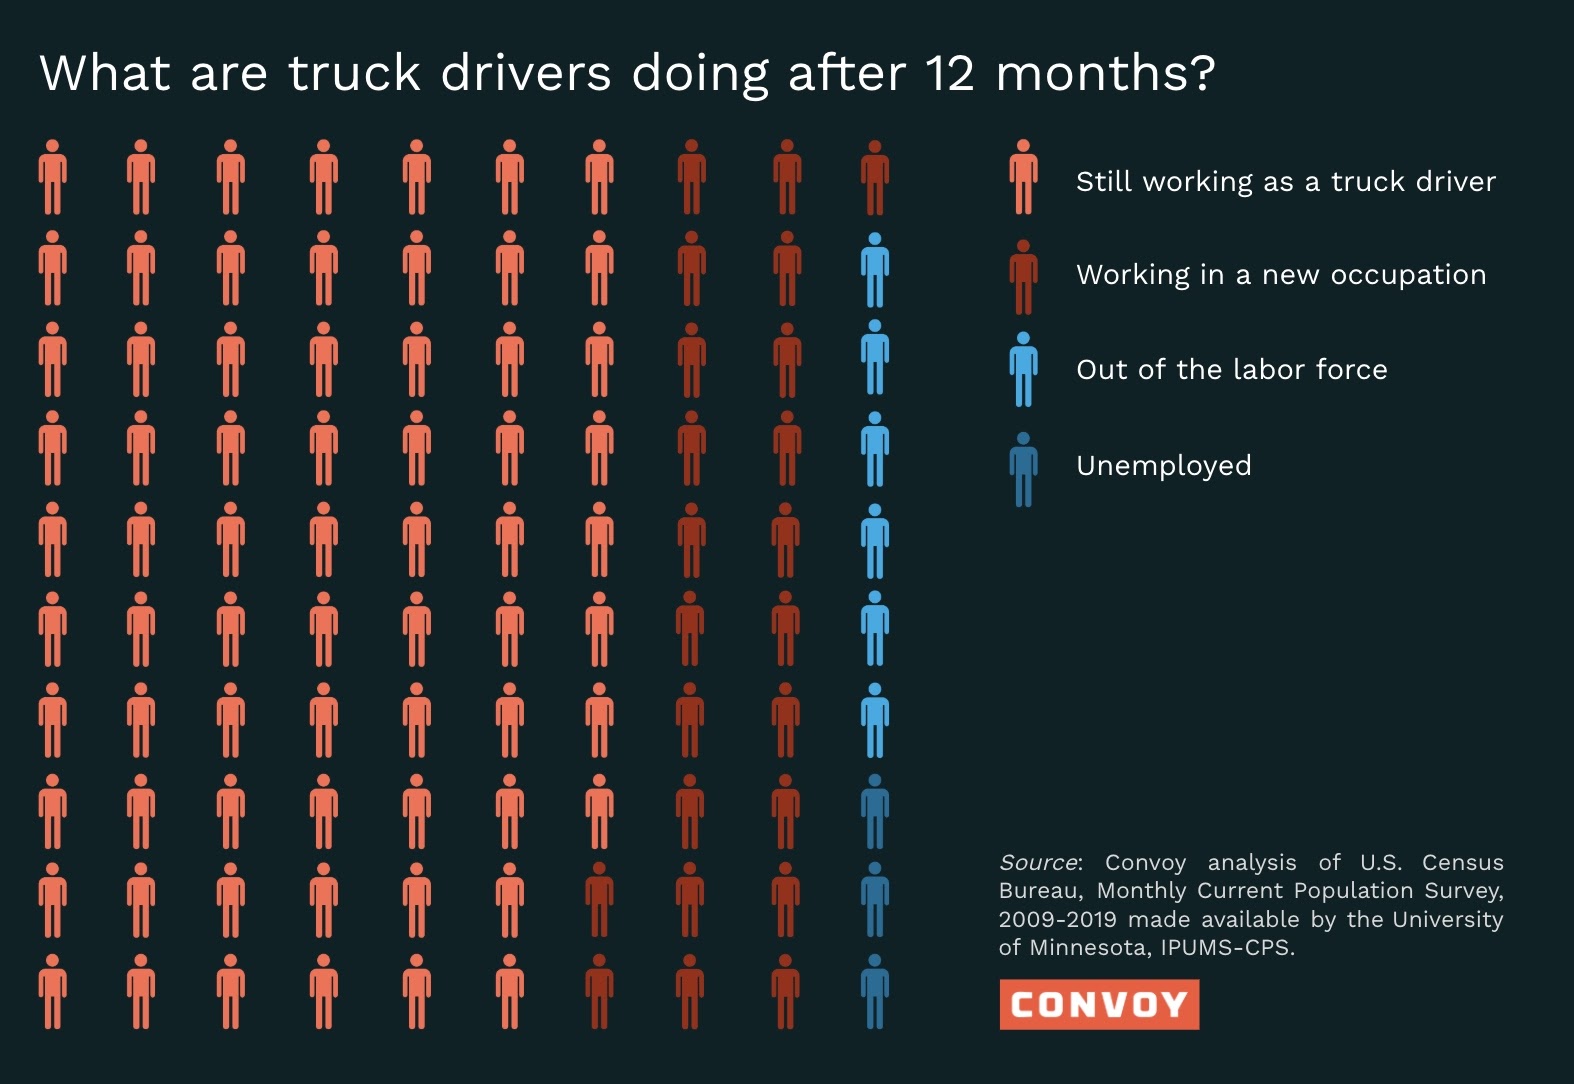 Trucking companies and drivers&#8217; turnovers dilemma 2